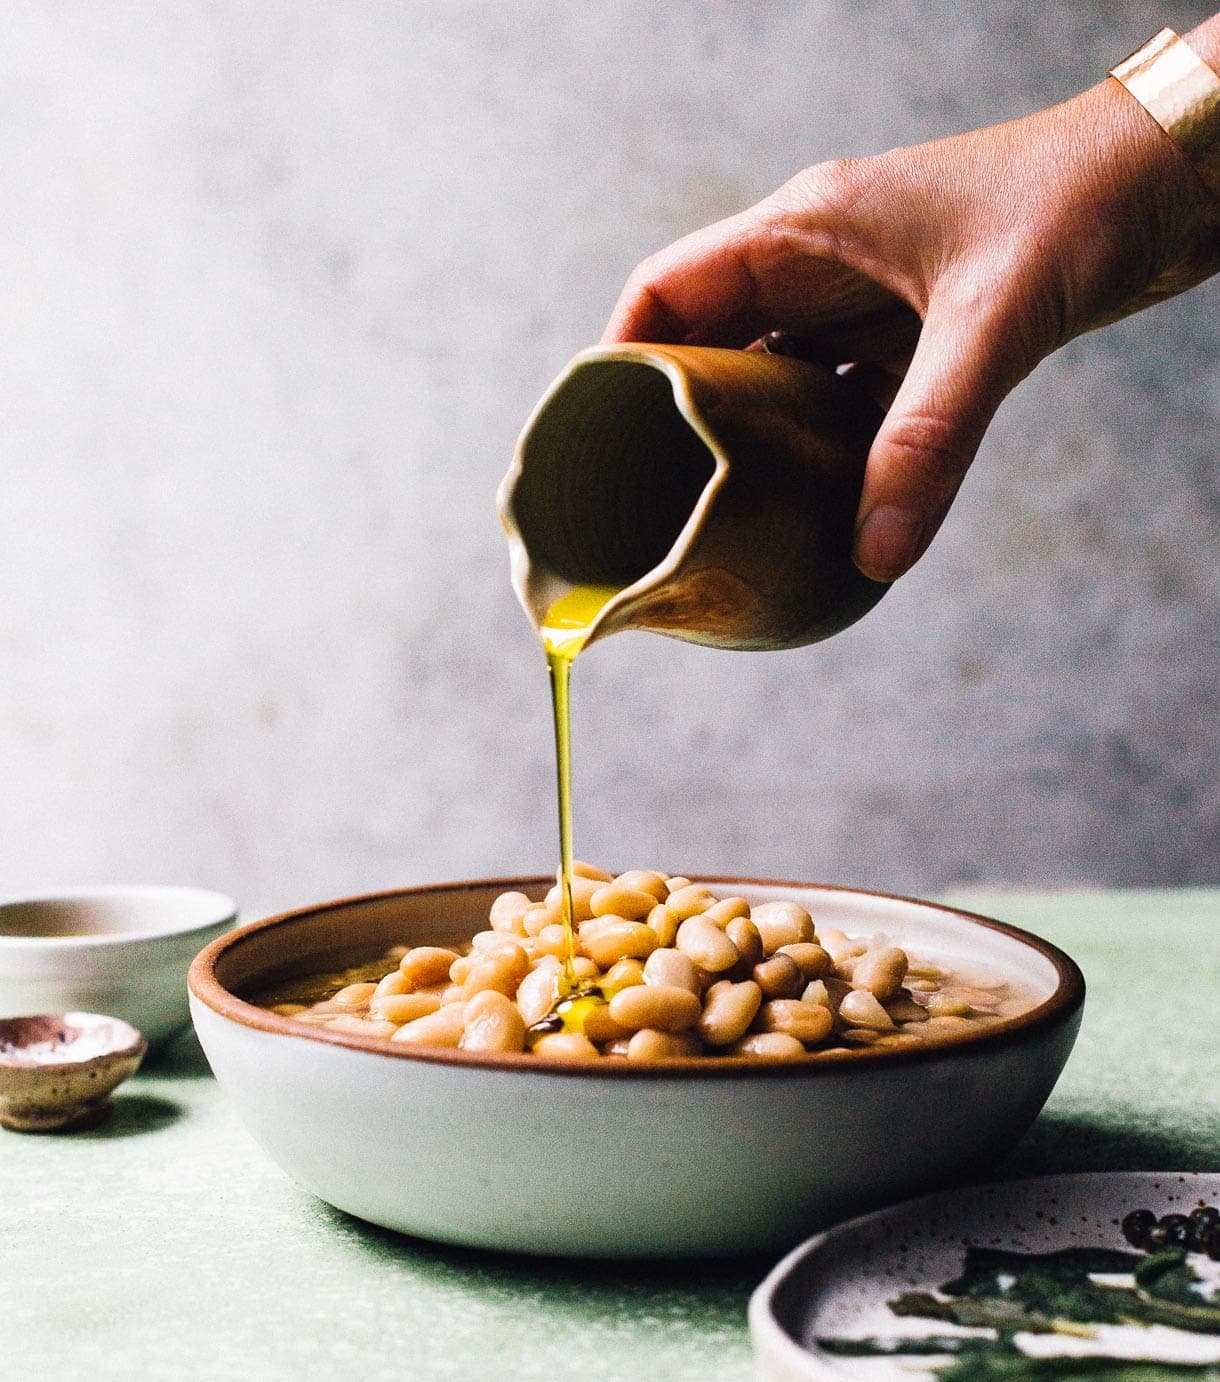 Tuscan White Beans with Olive Oil